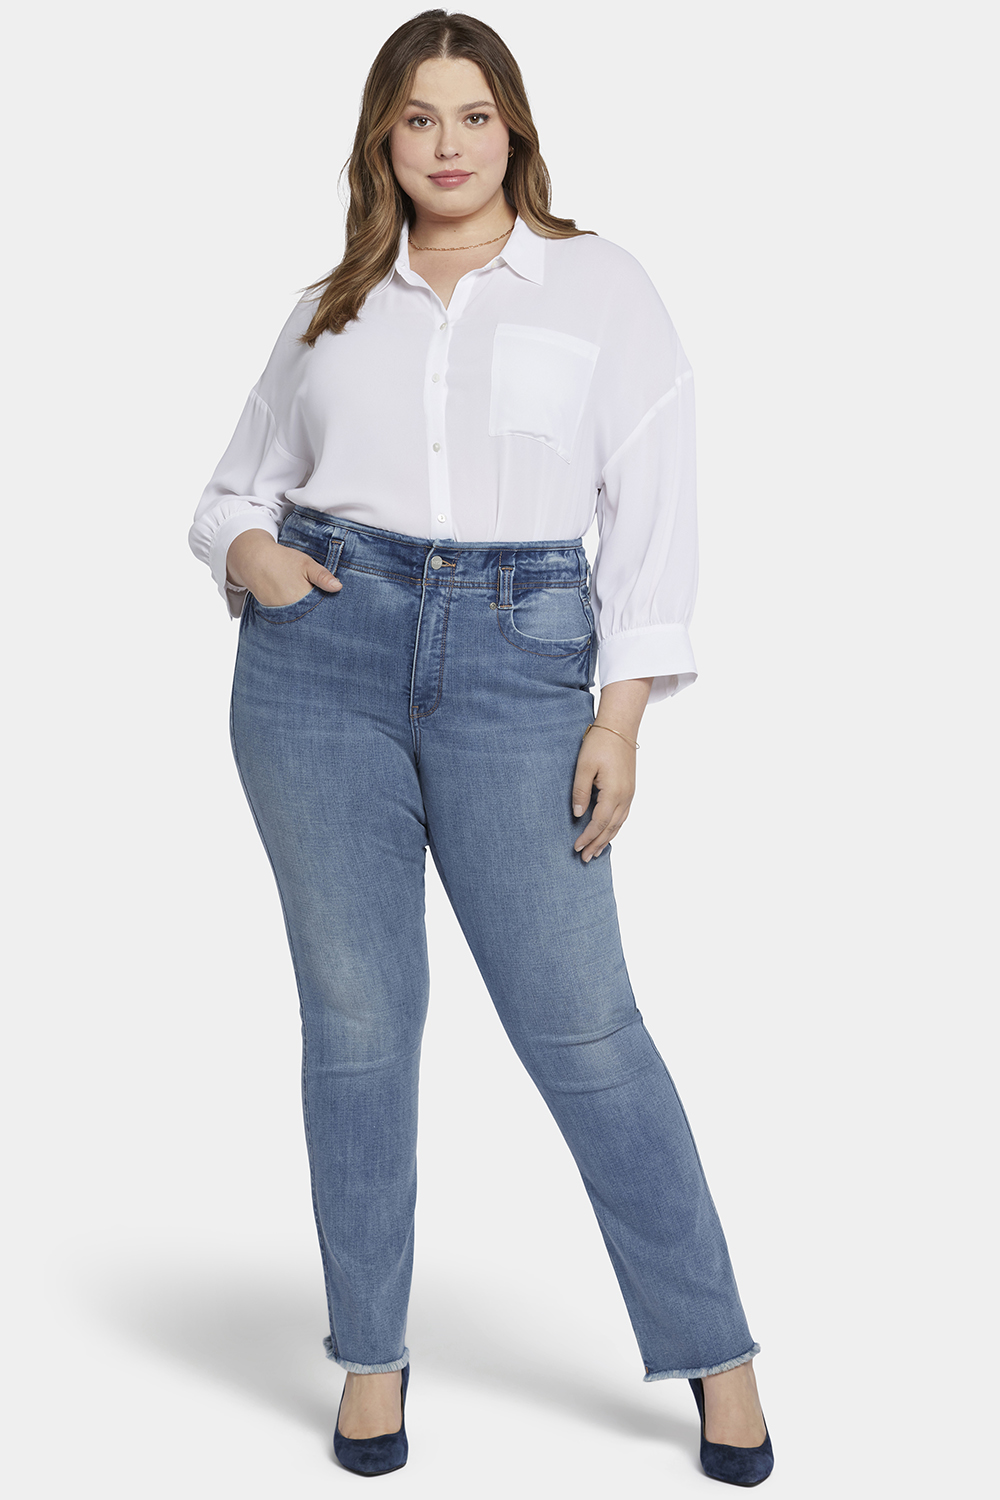 Skinny Jeans for Women Slim Fit Jeans High Rise Jeans Plus Size